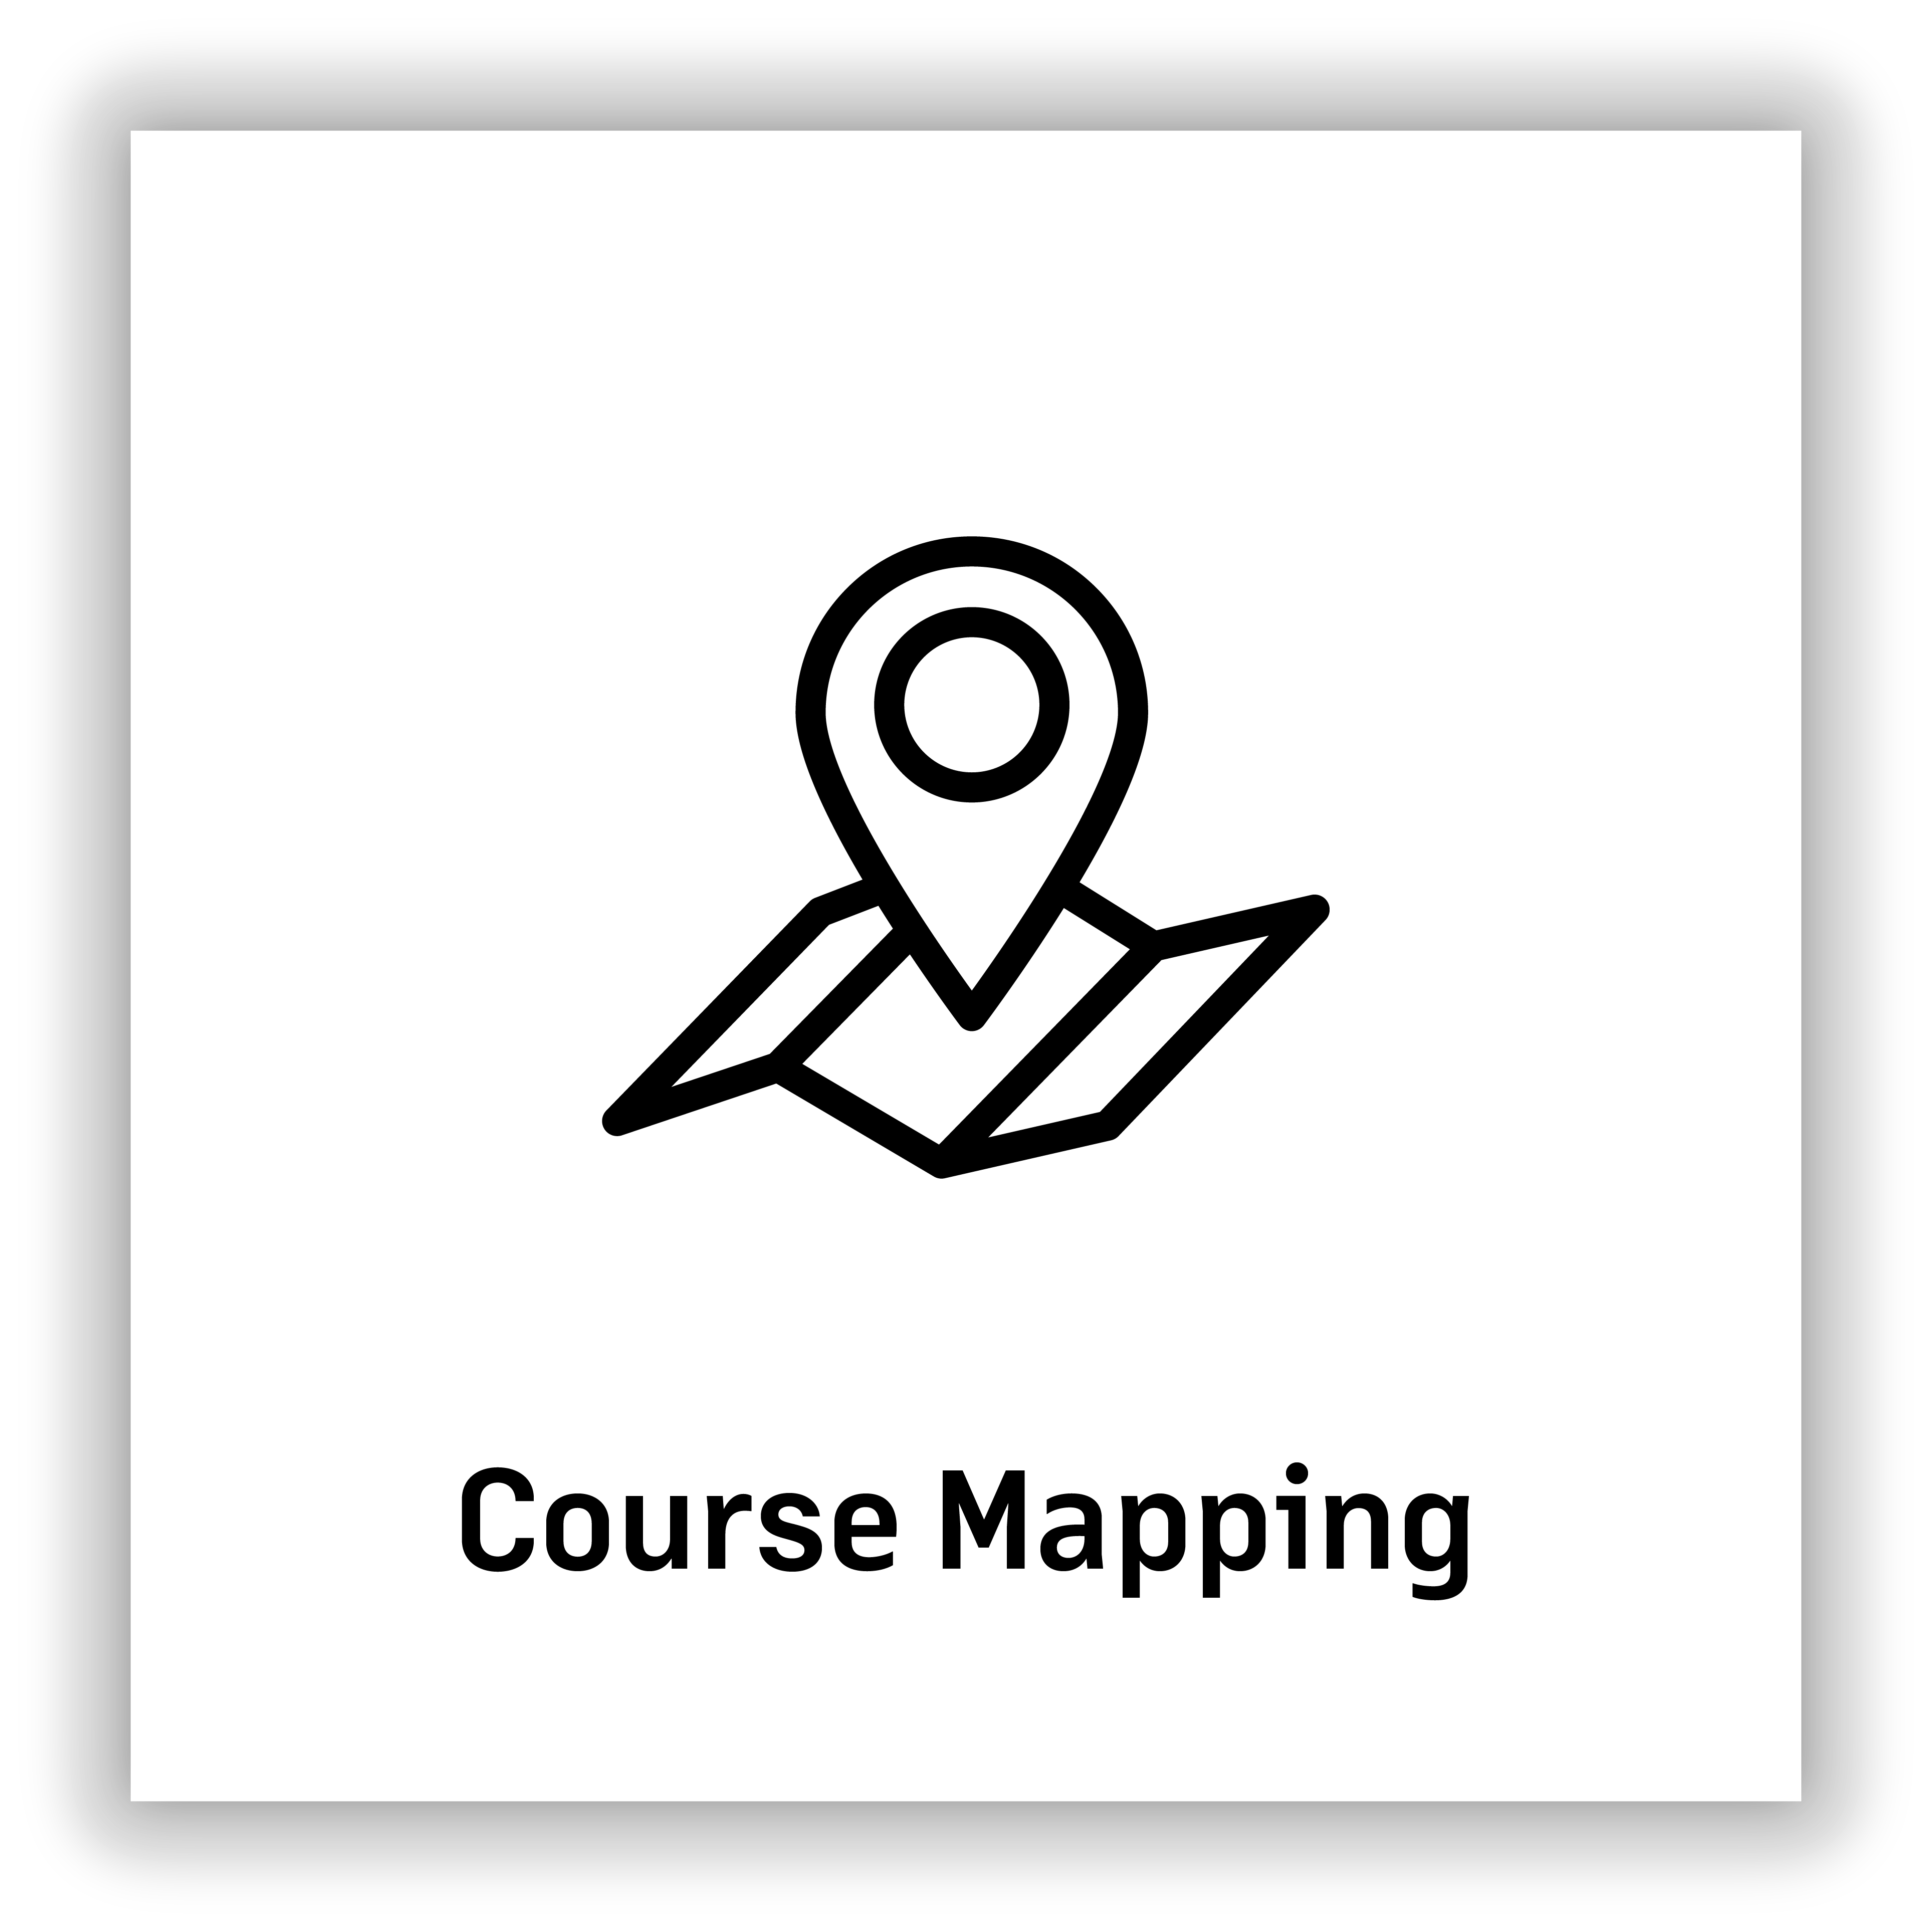 Course Mapping